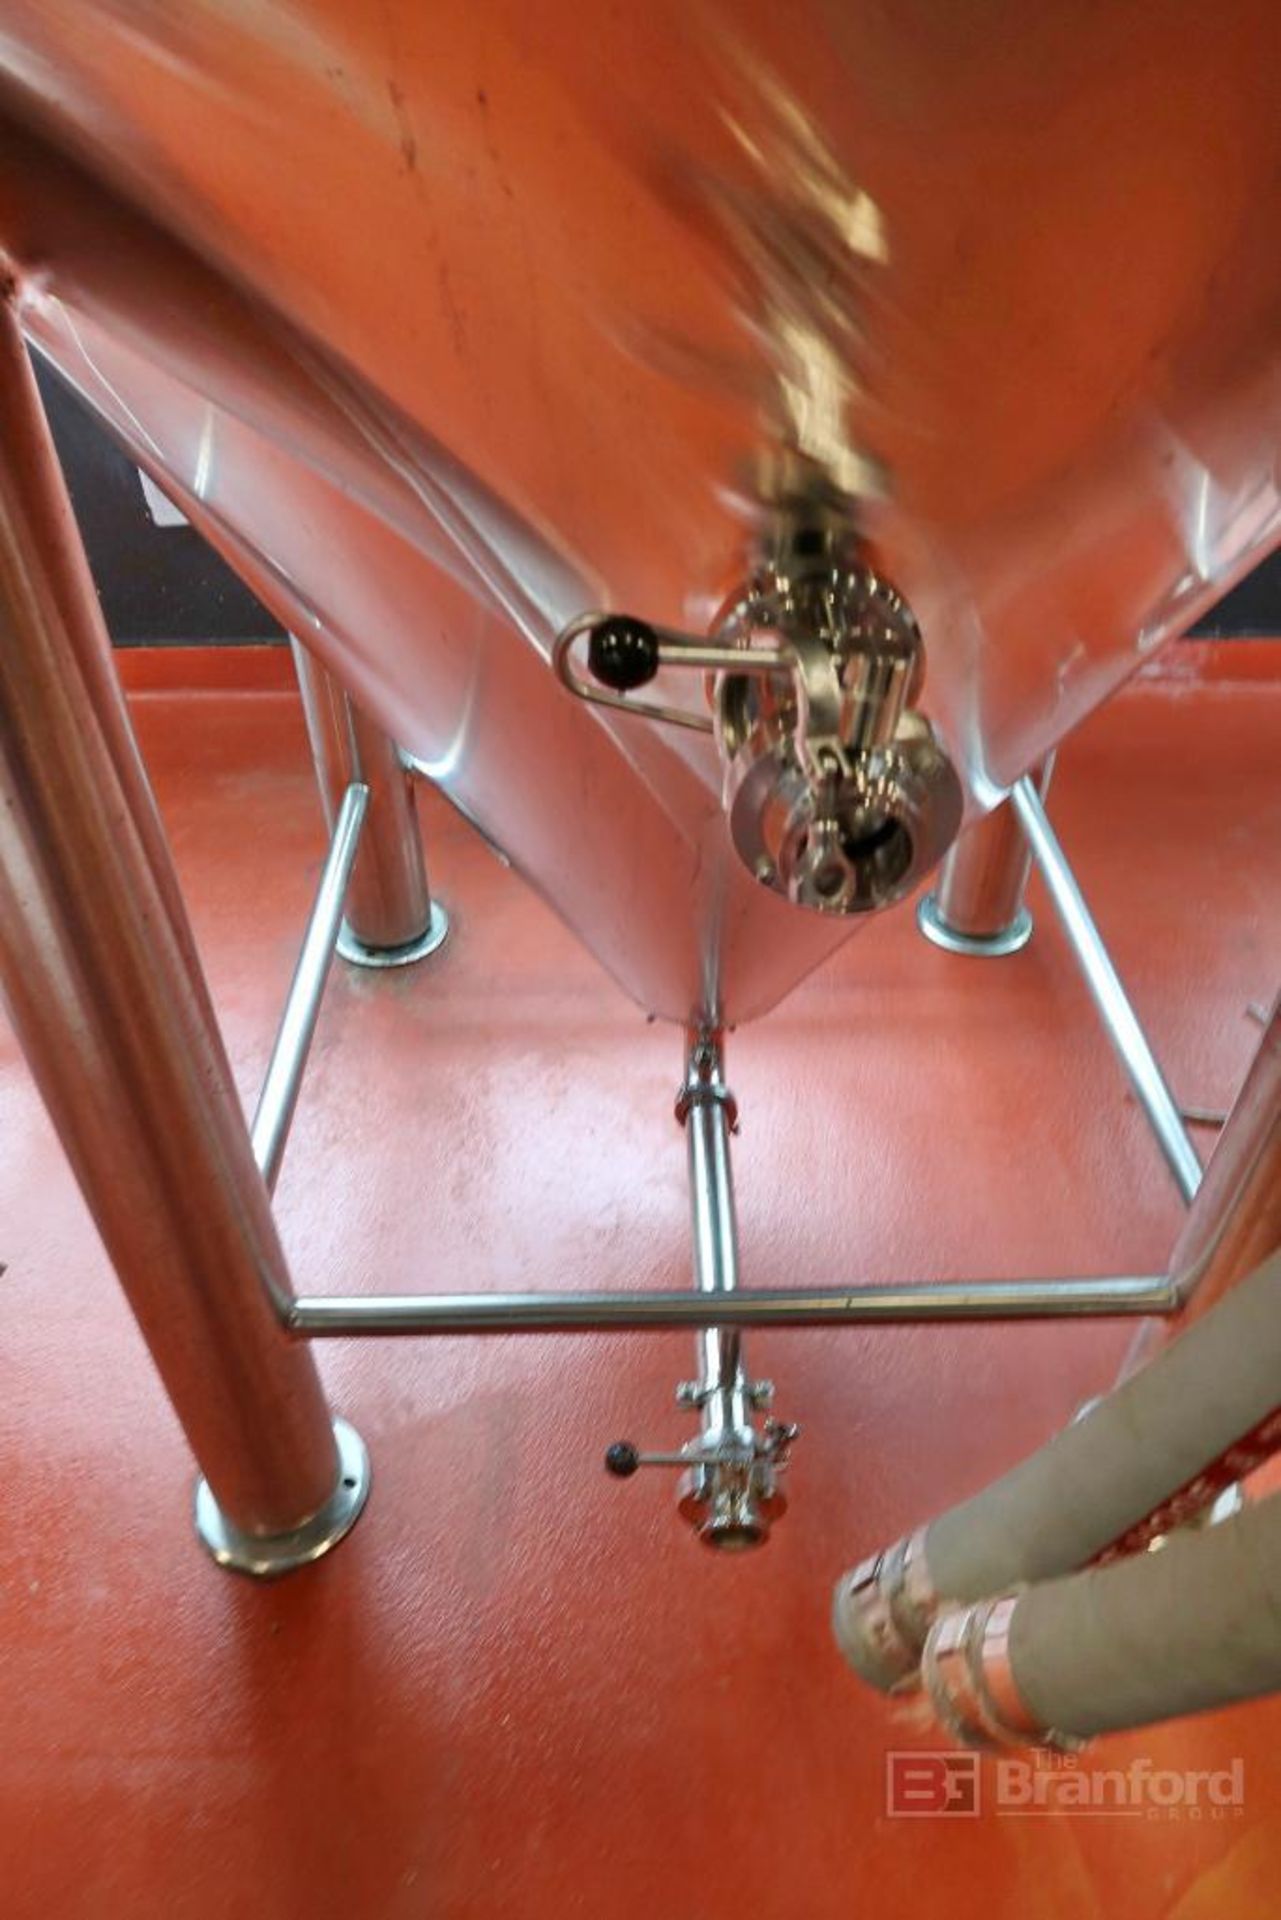 Stout 20-Bbl Jacketed Conical Fermenter Tank - Image 5 of 5